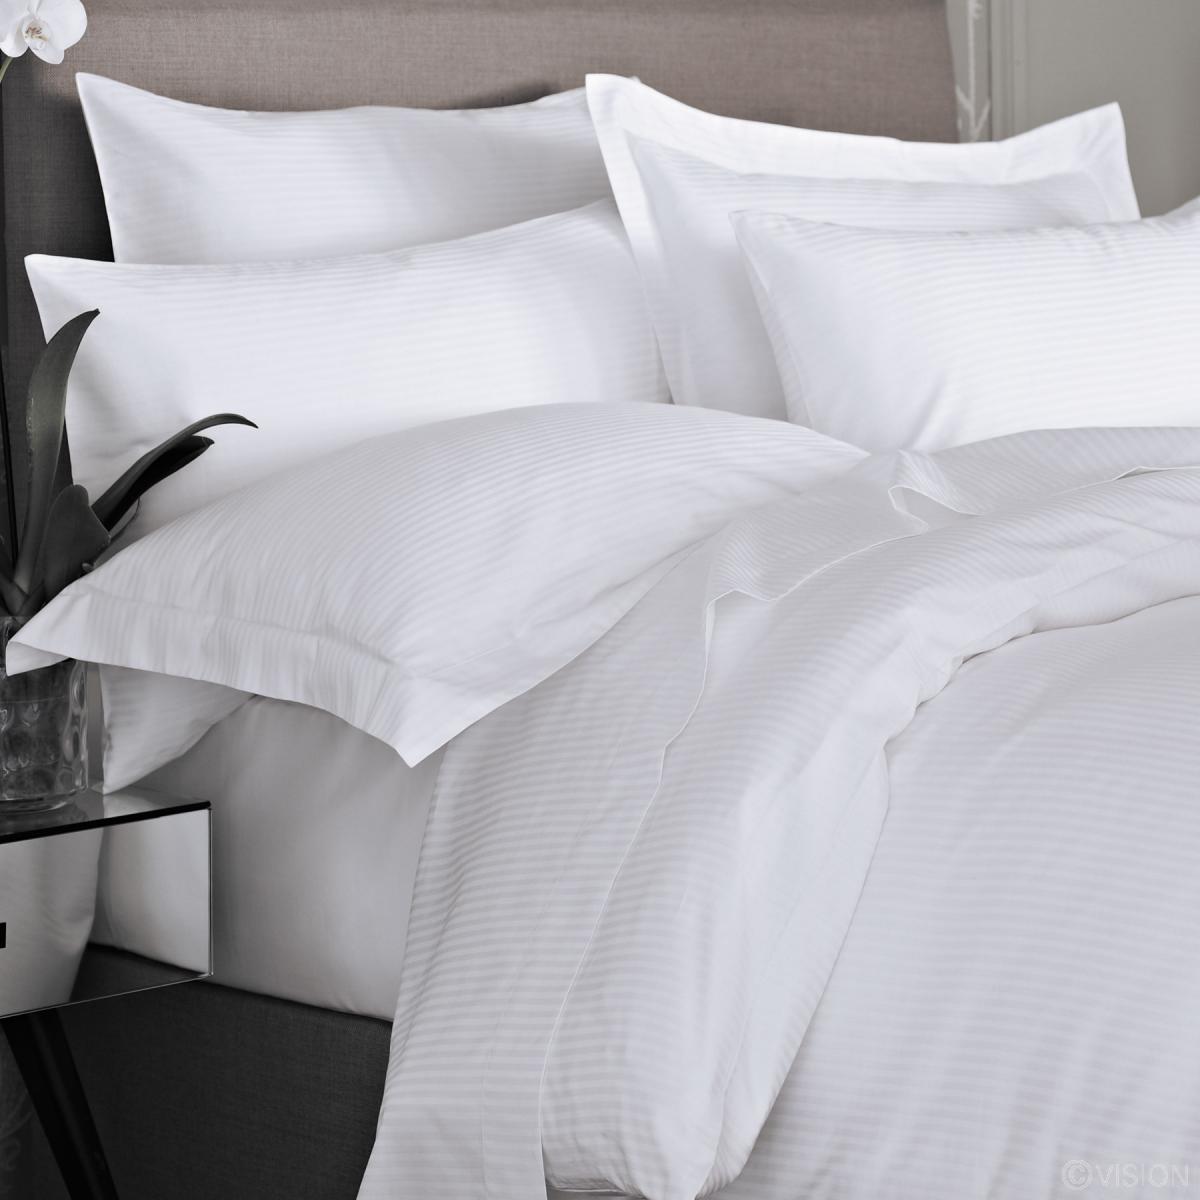 Read more about the article Difference Between Pillowcases and Pillow Shams